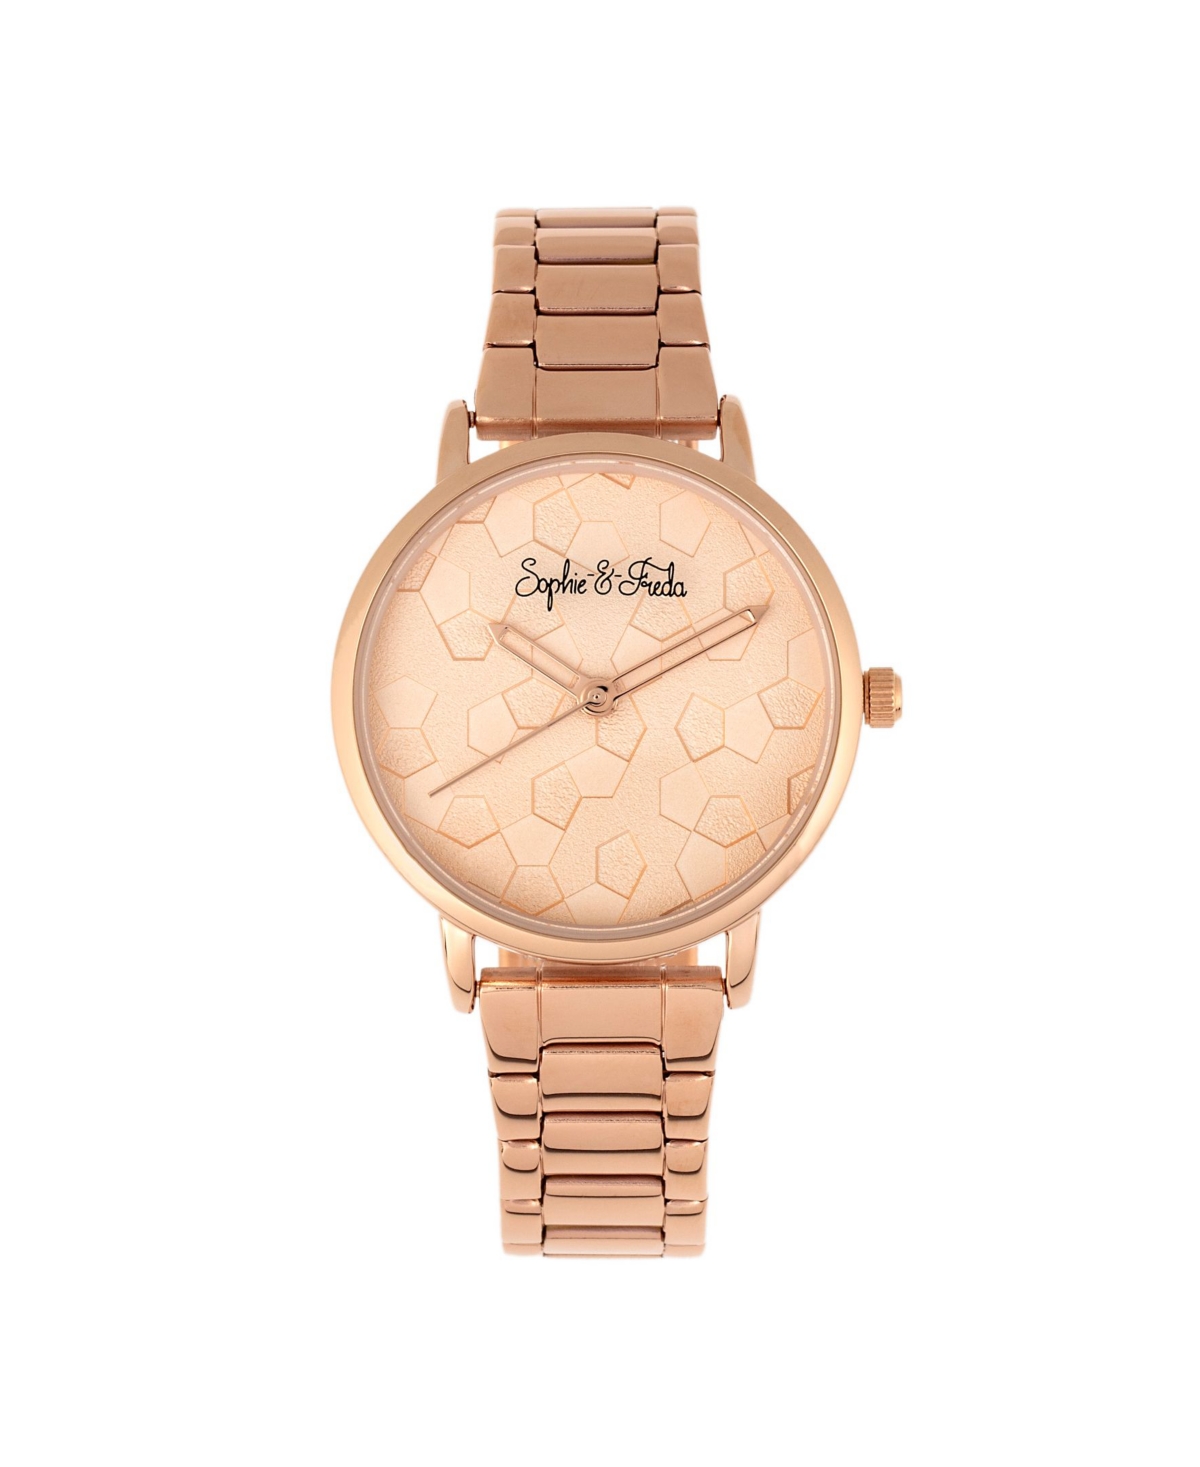 Breckenridge Stainless Steel Watches, 34mm - Rose Gold